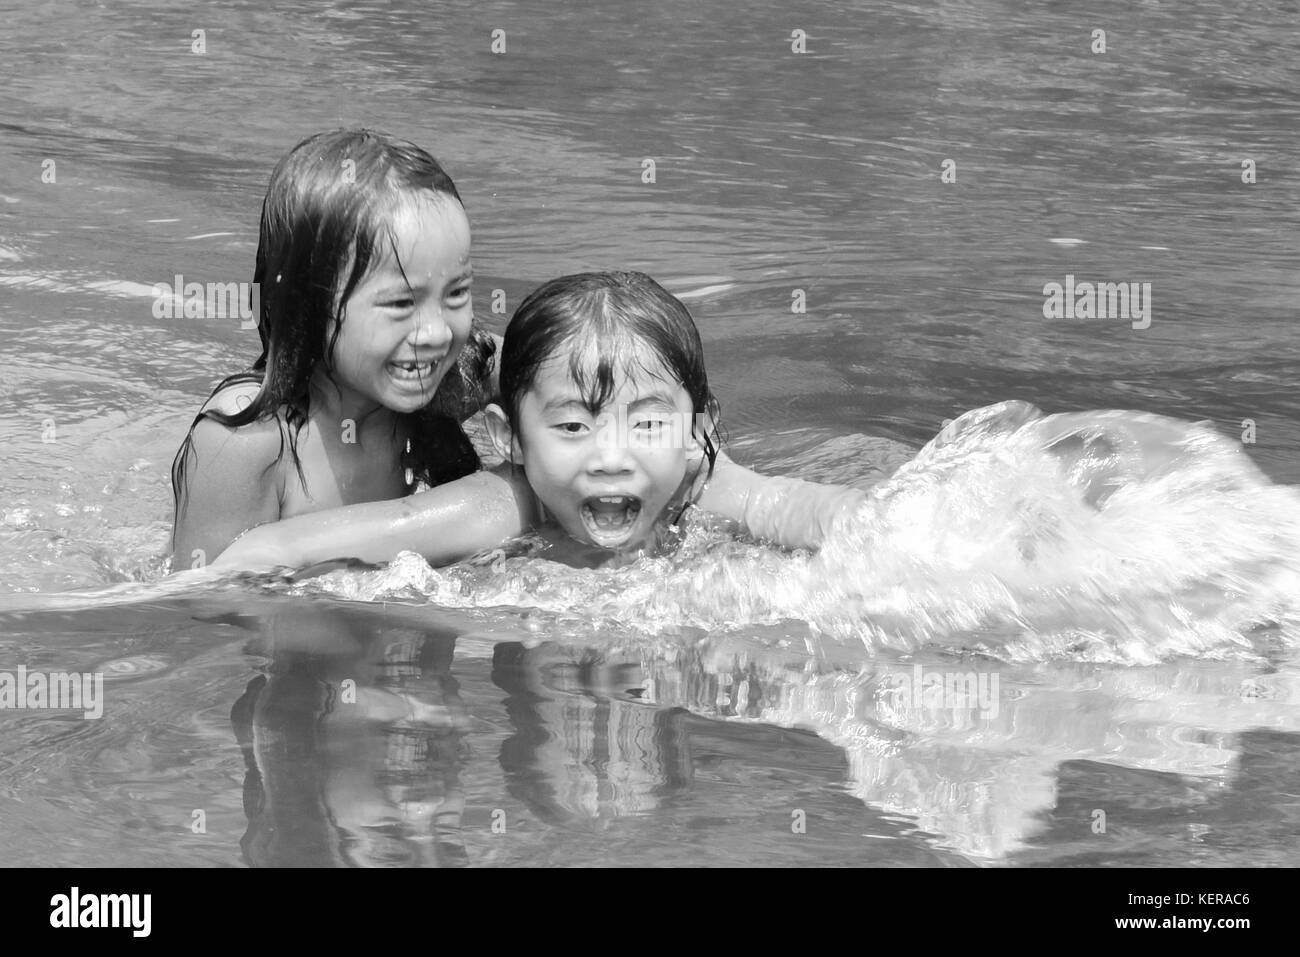 Children playing in the Mekong Laos Stock Photo - Alamy